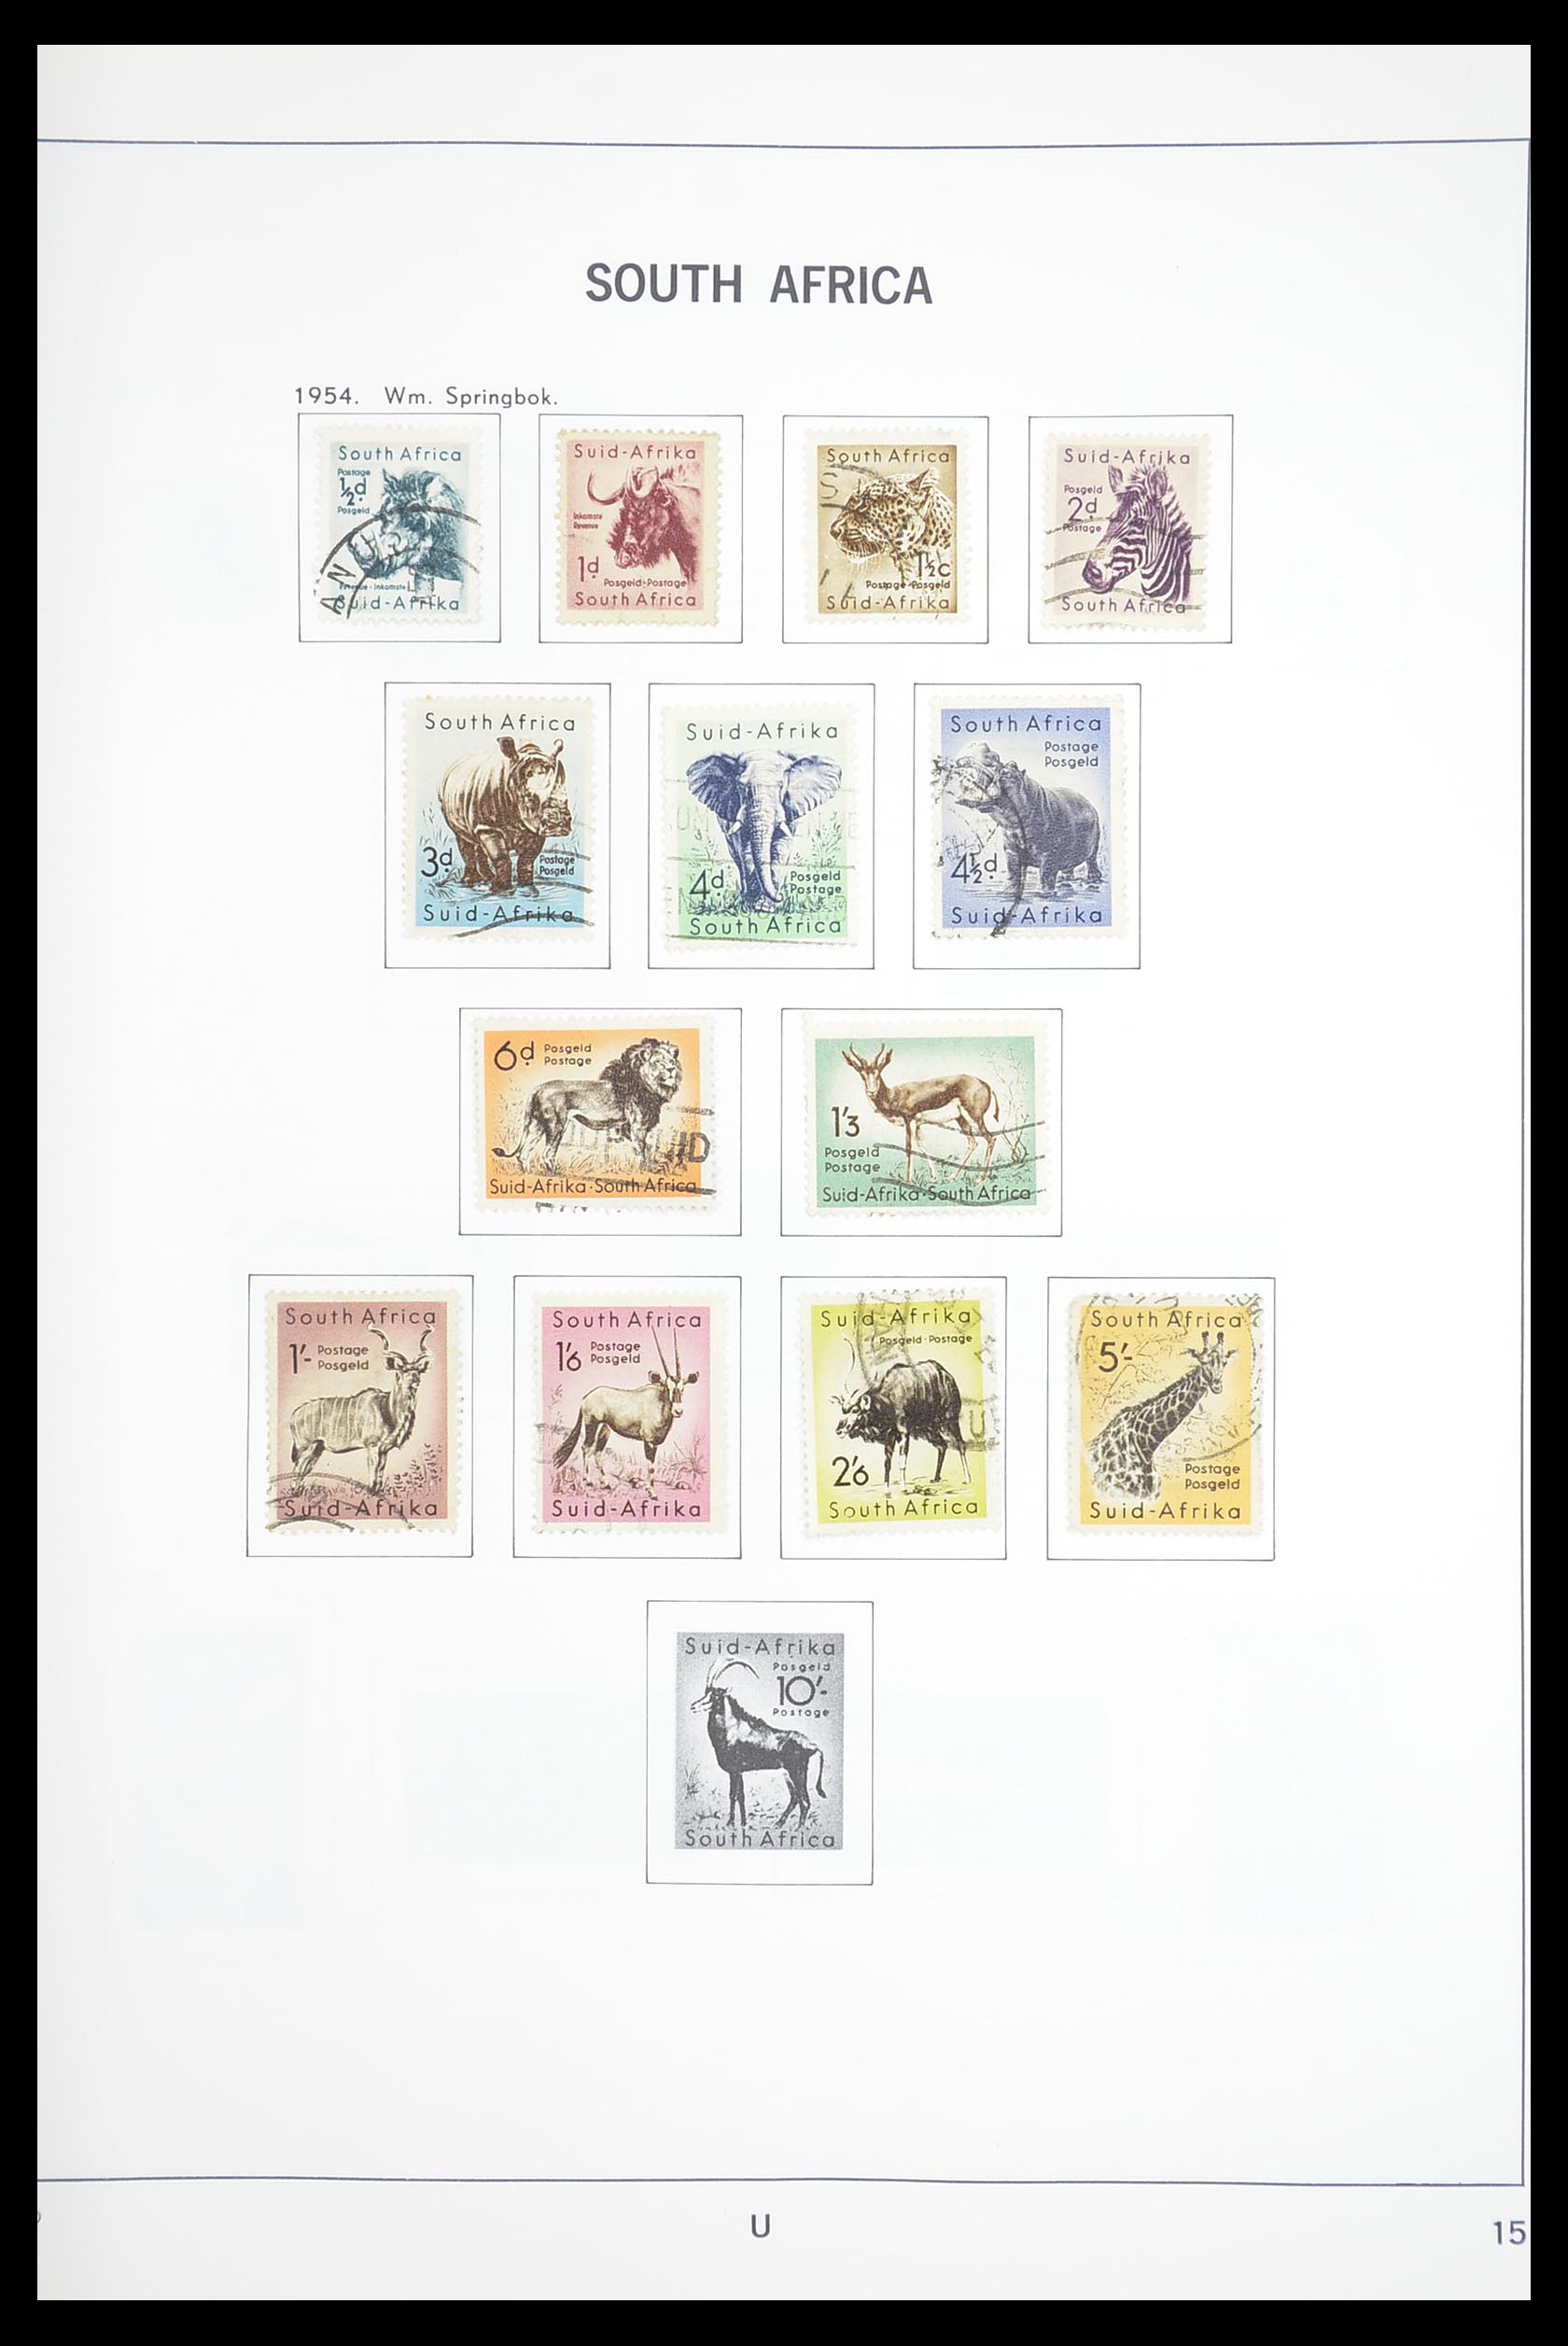 33393 015 - Stamp collection 33393 South Africa and territories 1910-1998.